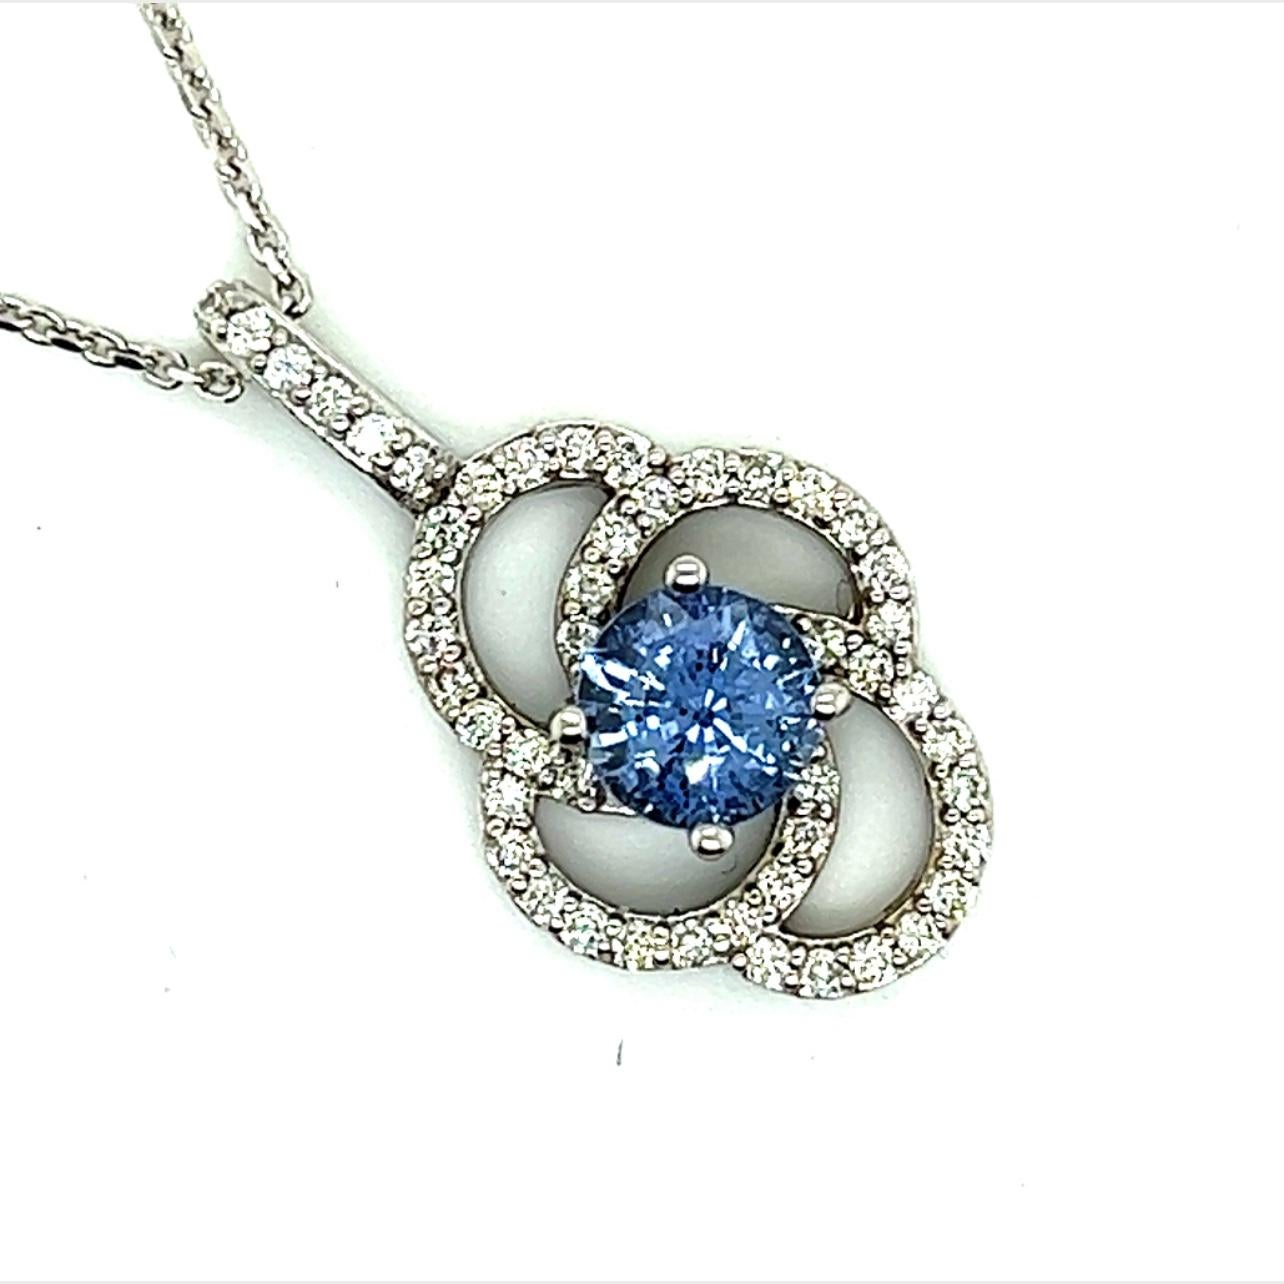 Women's Natural Sapphire Diamond Pendant with Chain 14k W Gold 2.17 TCW Certified For Sale